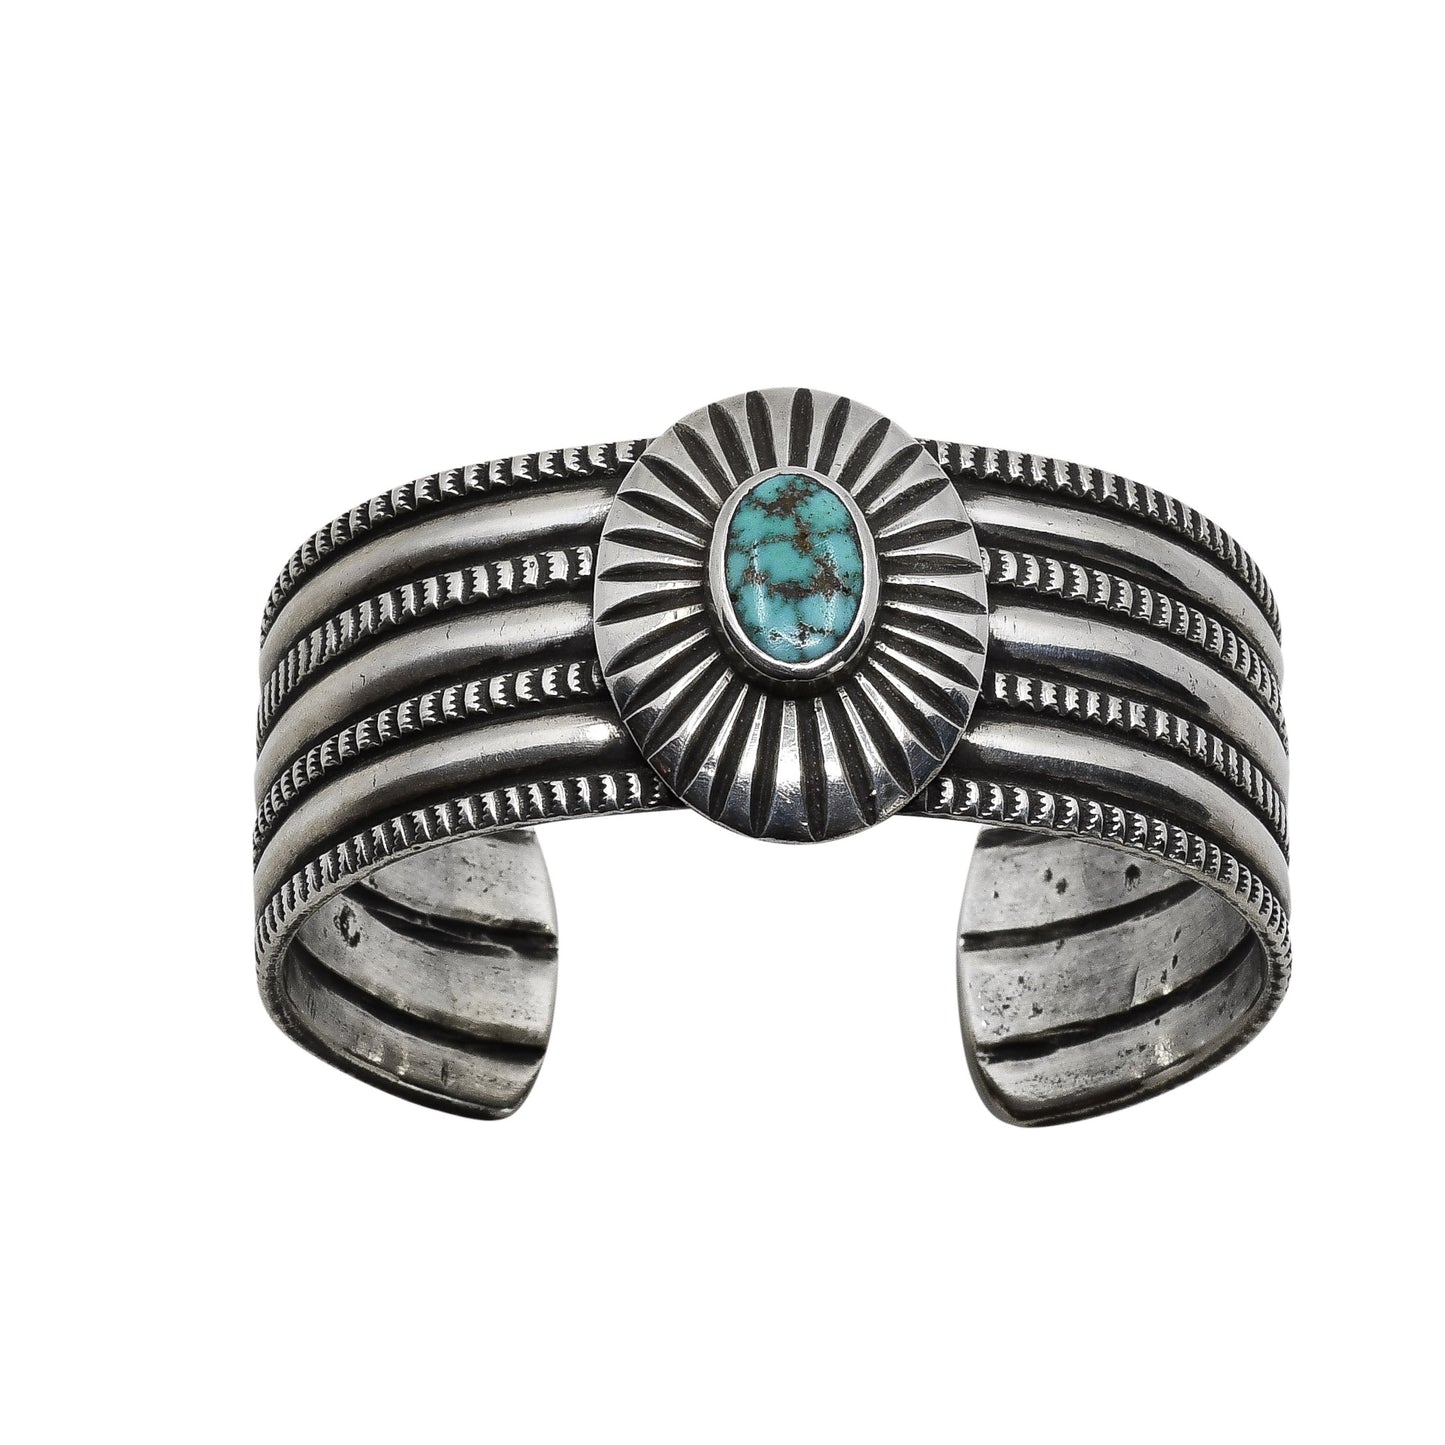 Perry Shorty Bracelet of Turquoise and Coin Silver - Turquoise & Tufa